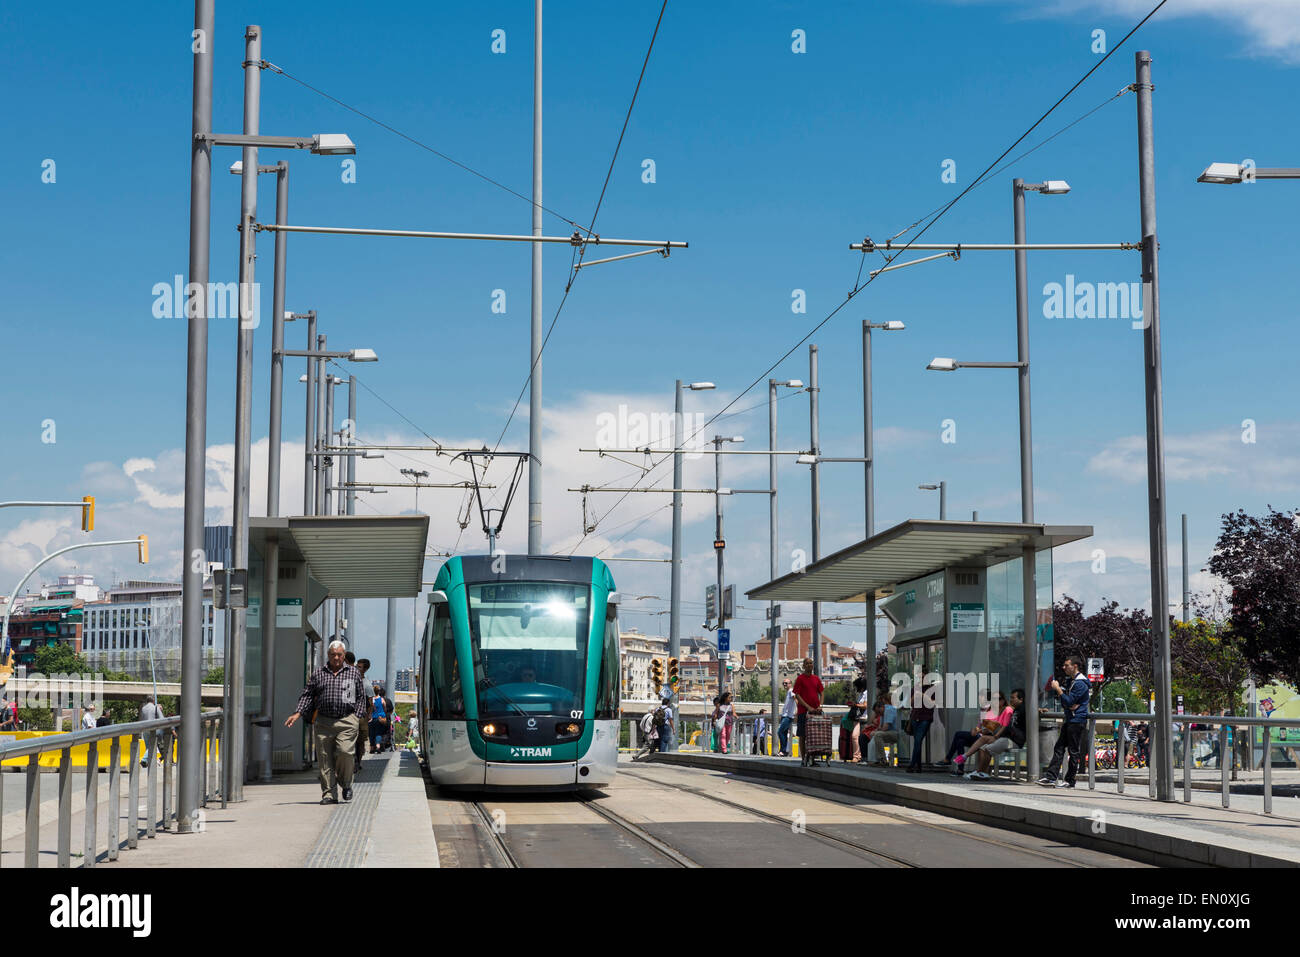 Barcelona tram known as Trambaix. In the picture the tram is going through the square Glories Stock Photo